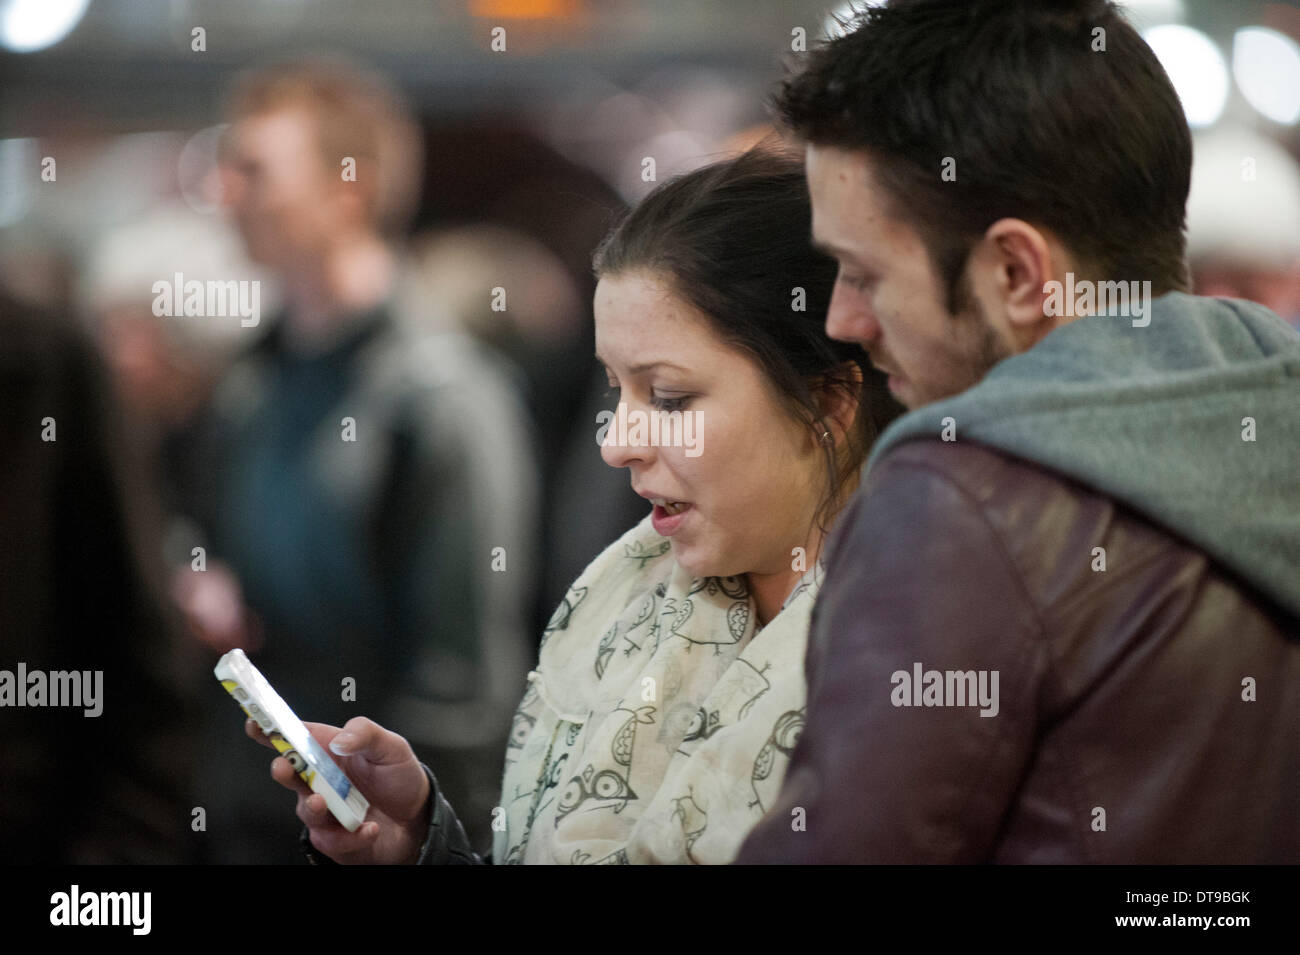 MANCHESTER, UK. 12th February, 2014. A couple check their smartphone for information at Manchester Piccadilly train station during strong winds across the United Kingdom, which led to to travel disruption for evening commuters. Some travellers were advised to postpone their travel plans for the day. Credit:  Russell Hart/Alamy Live News. Stock Photo